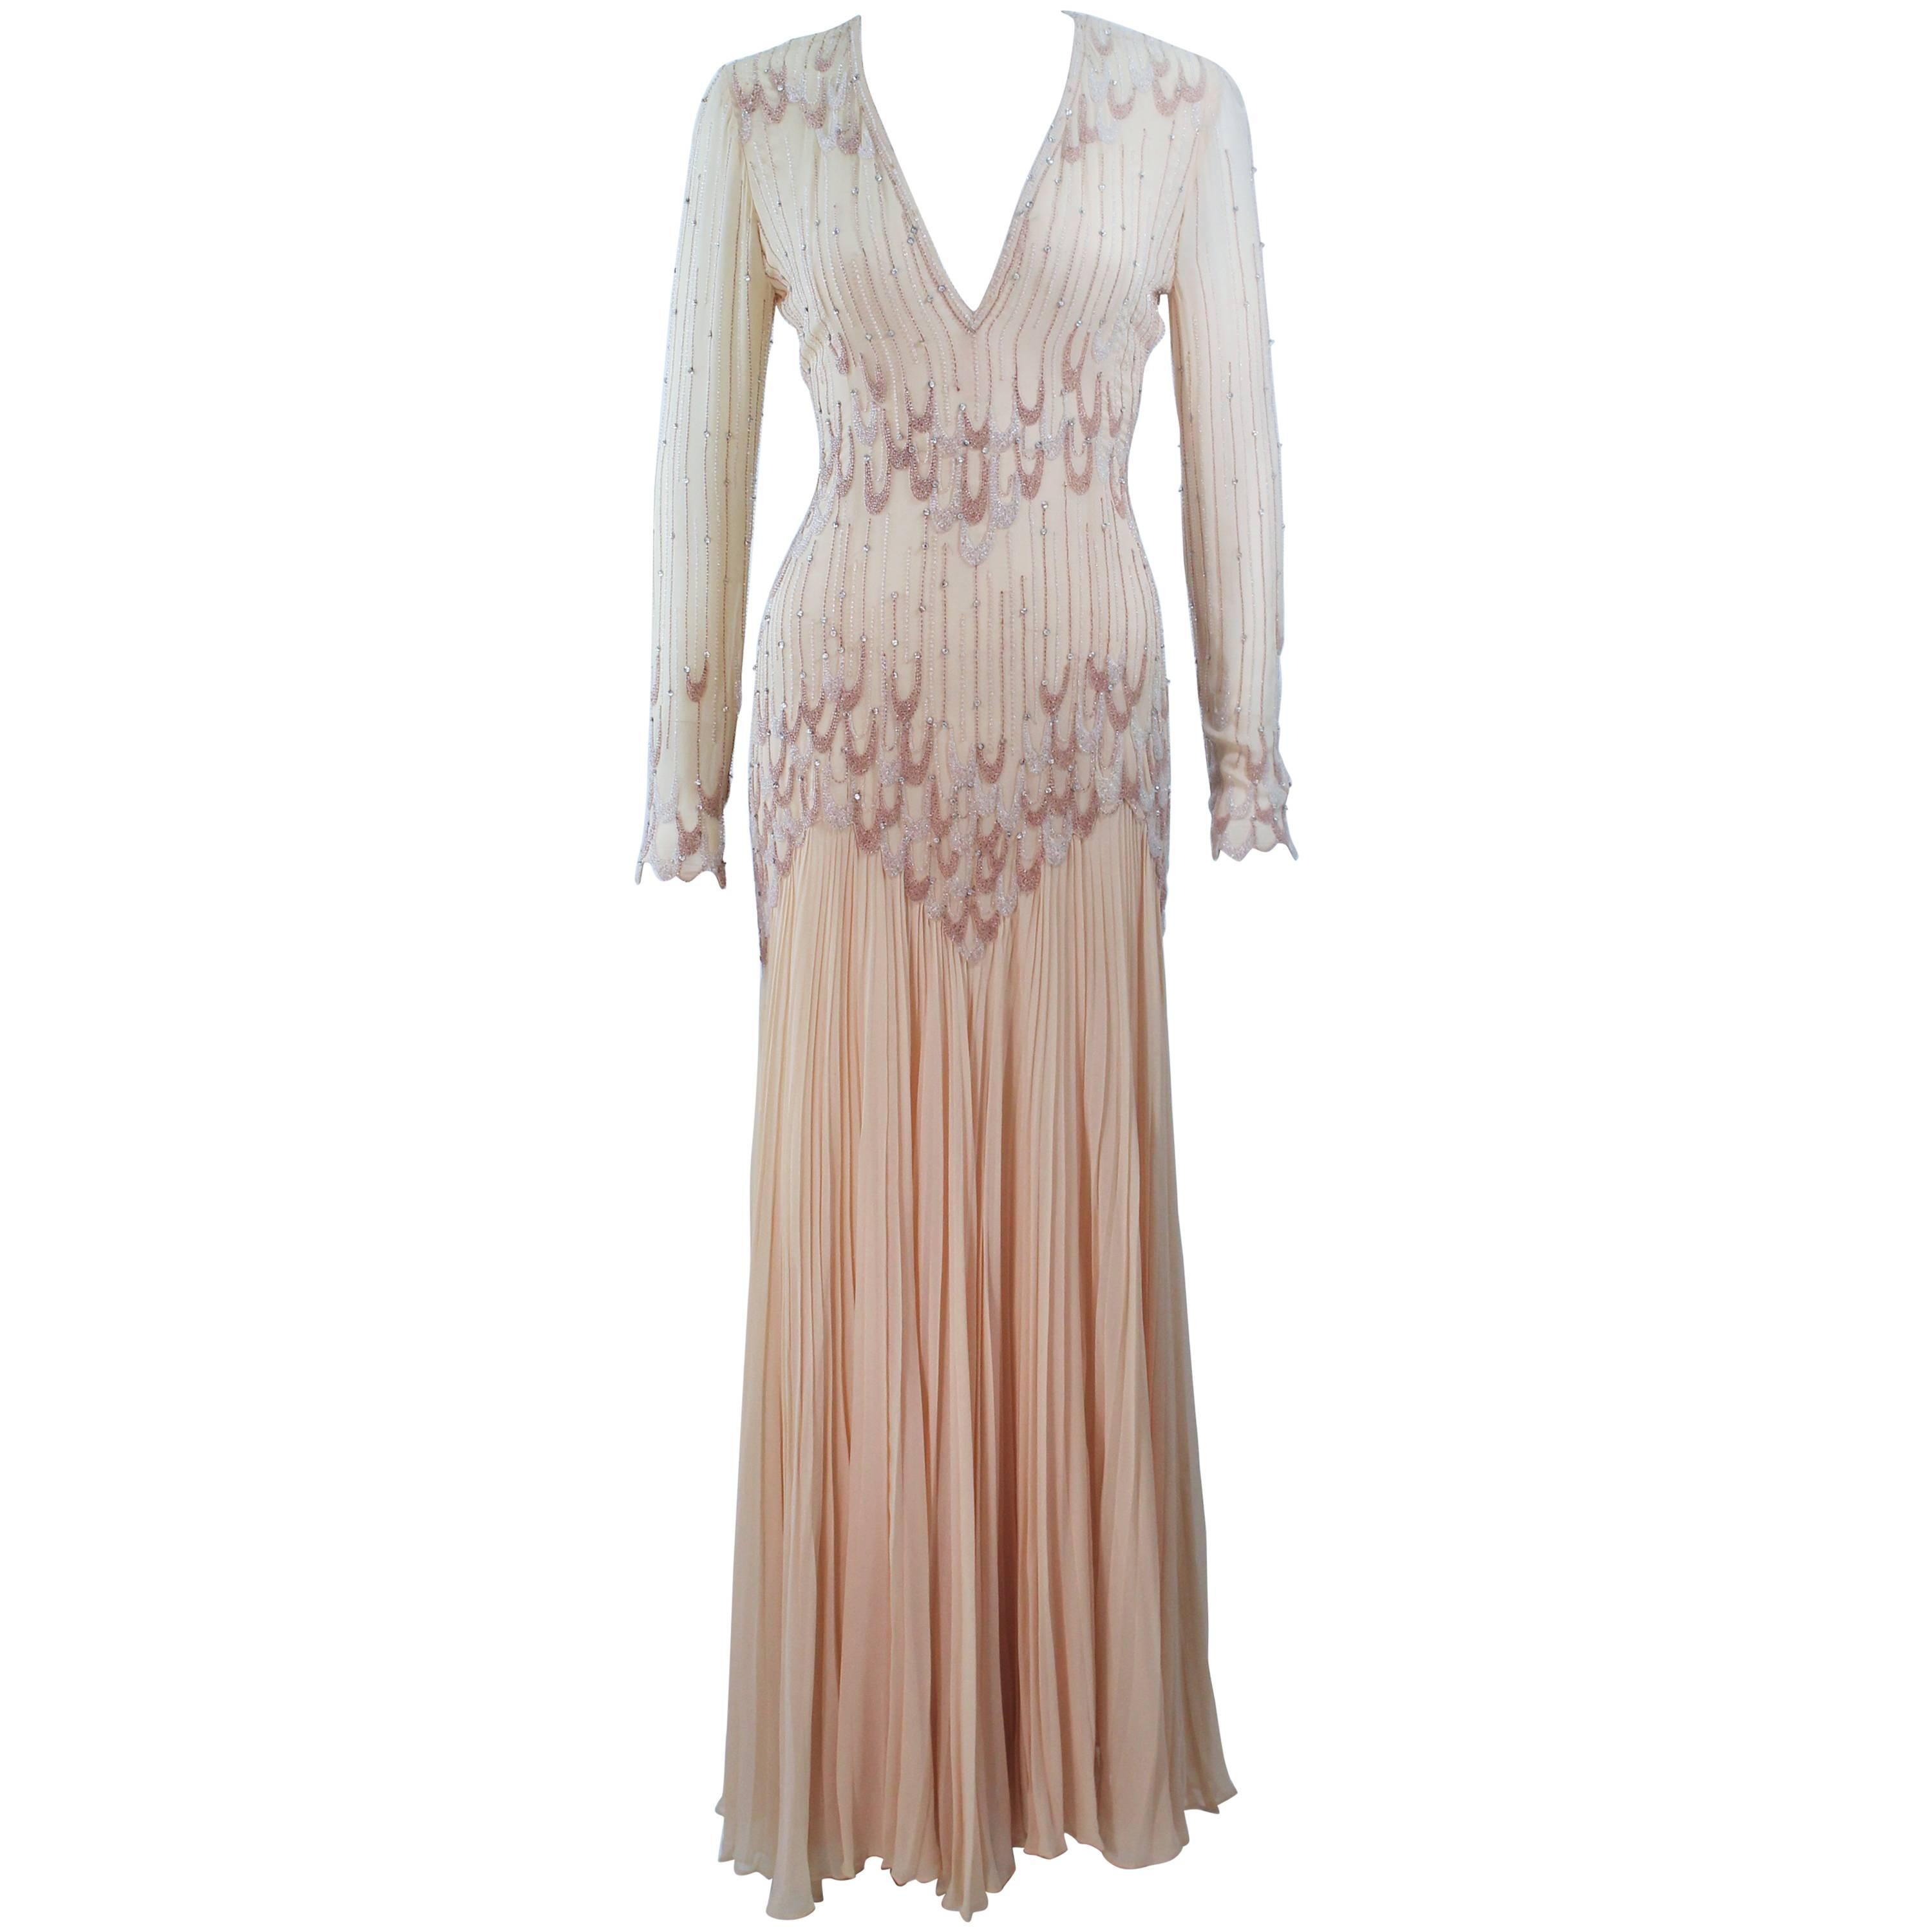 BALESTRA Nude Chiffon Gown with Beaded Design Size 6 8